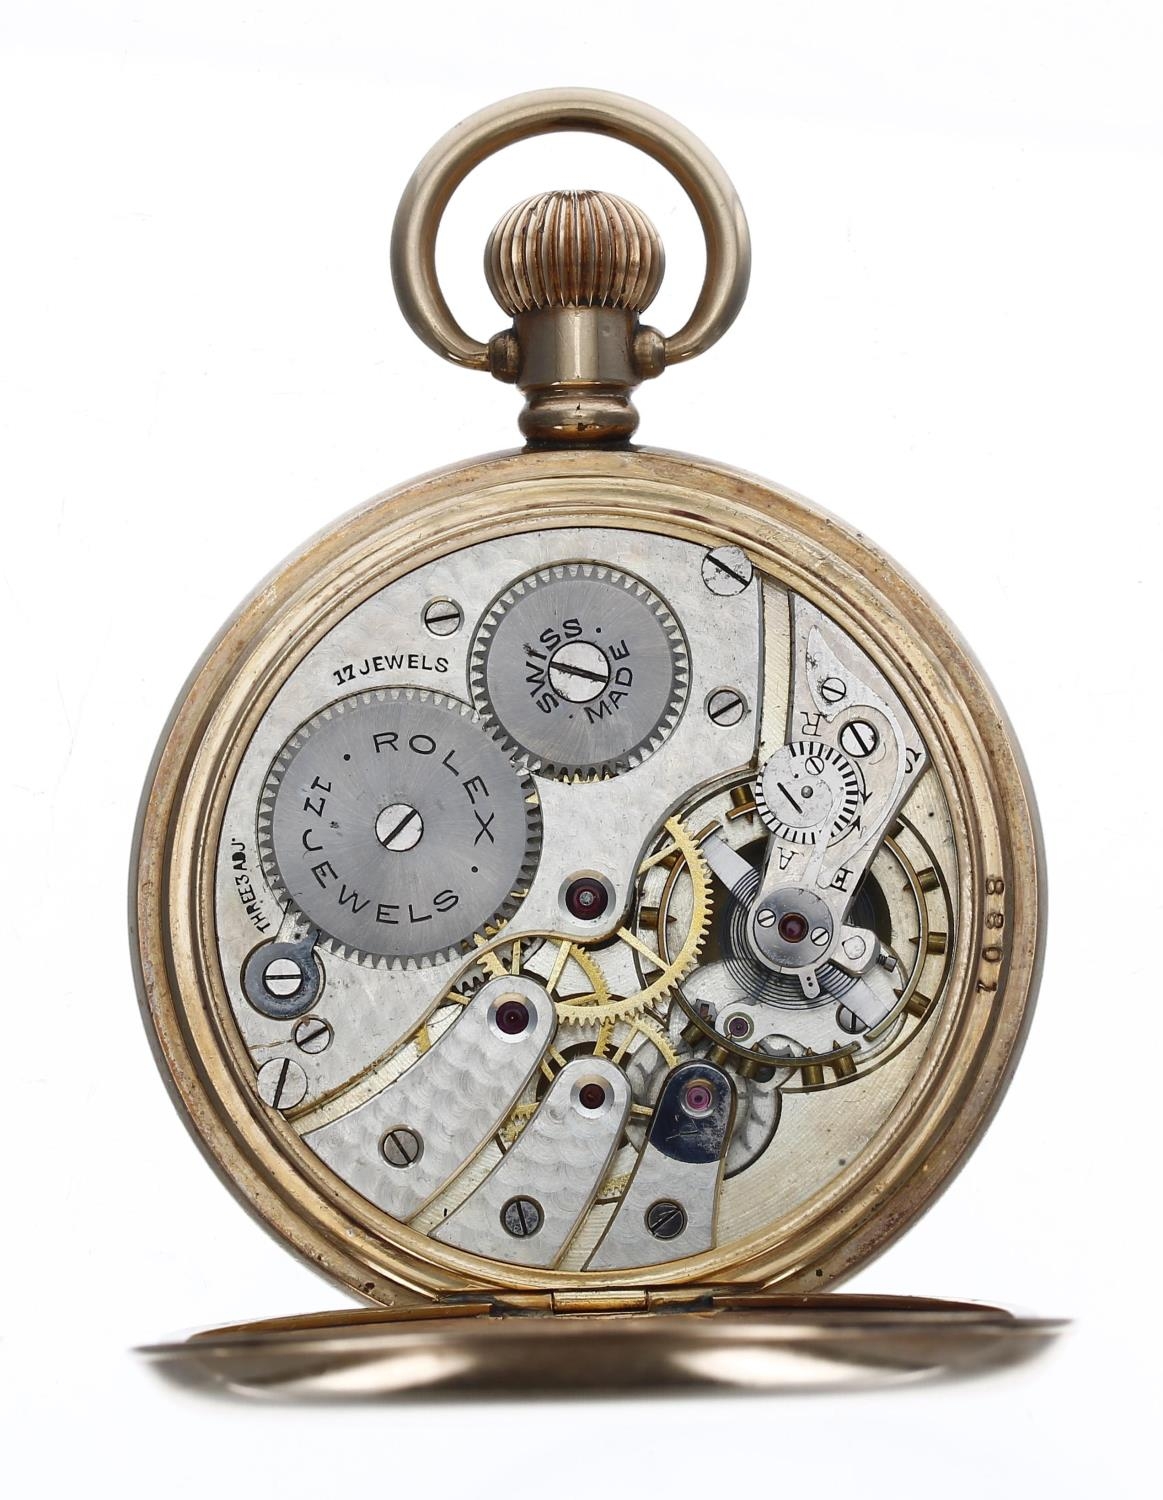 Rolex - Swiss gold plated lever pocket watch, signed 17 jewel three adj. movement, signed dial - Image 3 of 4